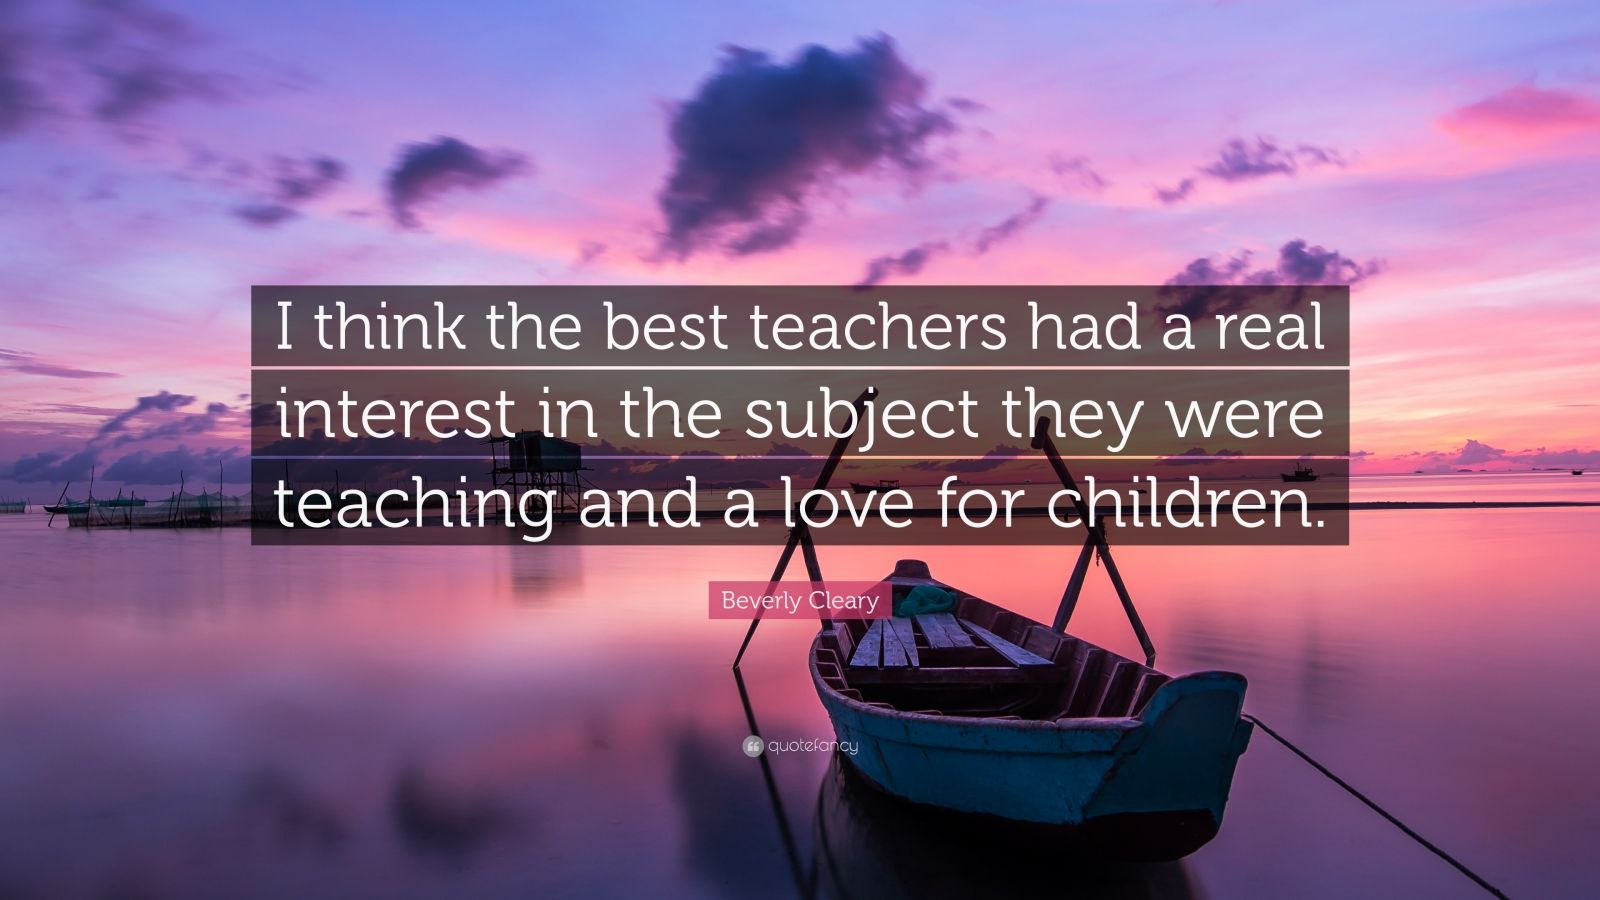 Beverly Cleary Quote: "I think the best teachers had a real interest in the subject they were ...